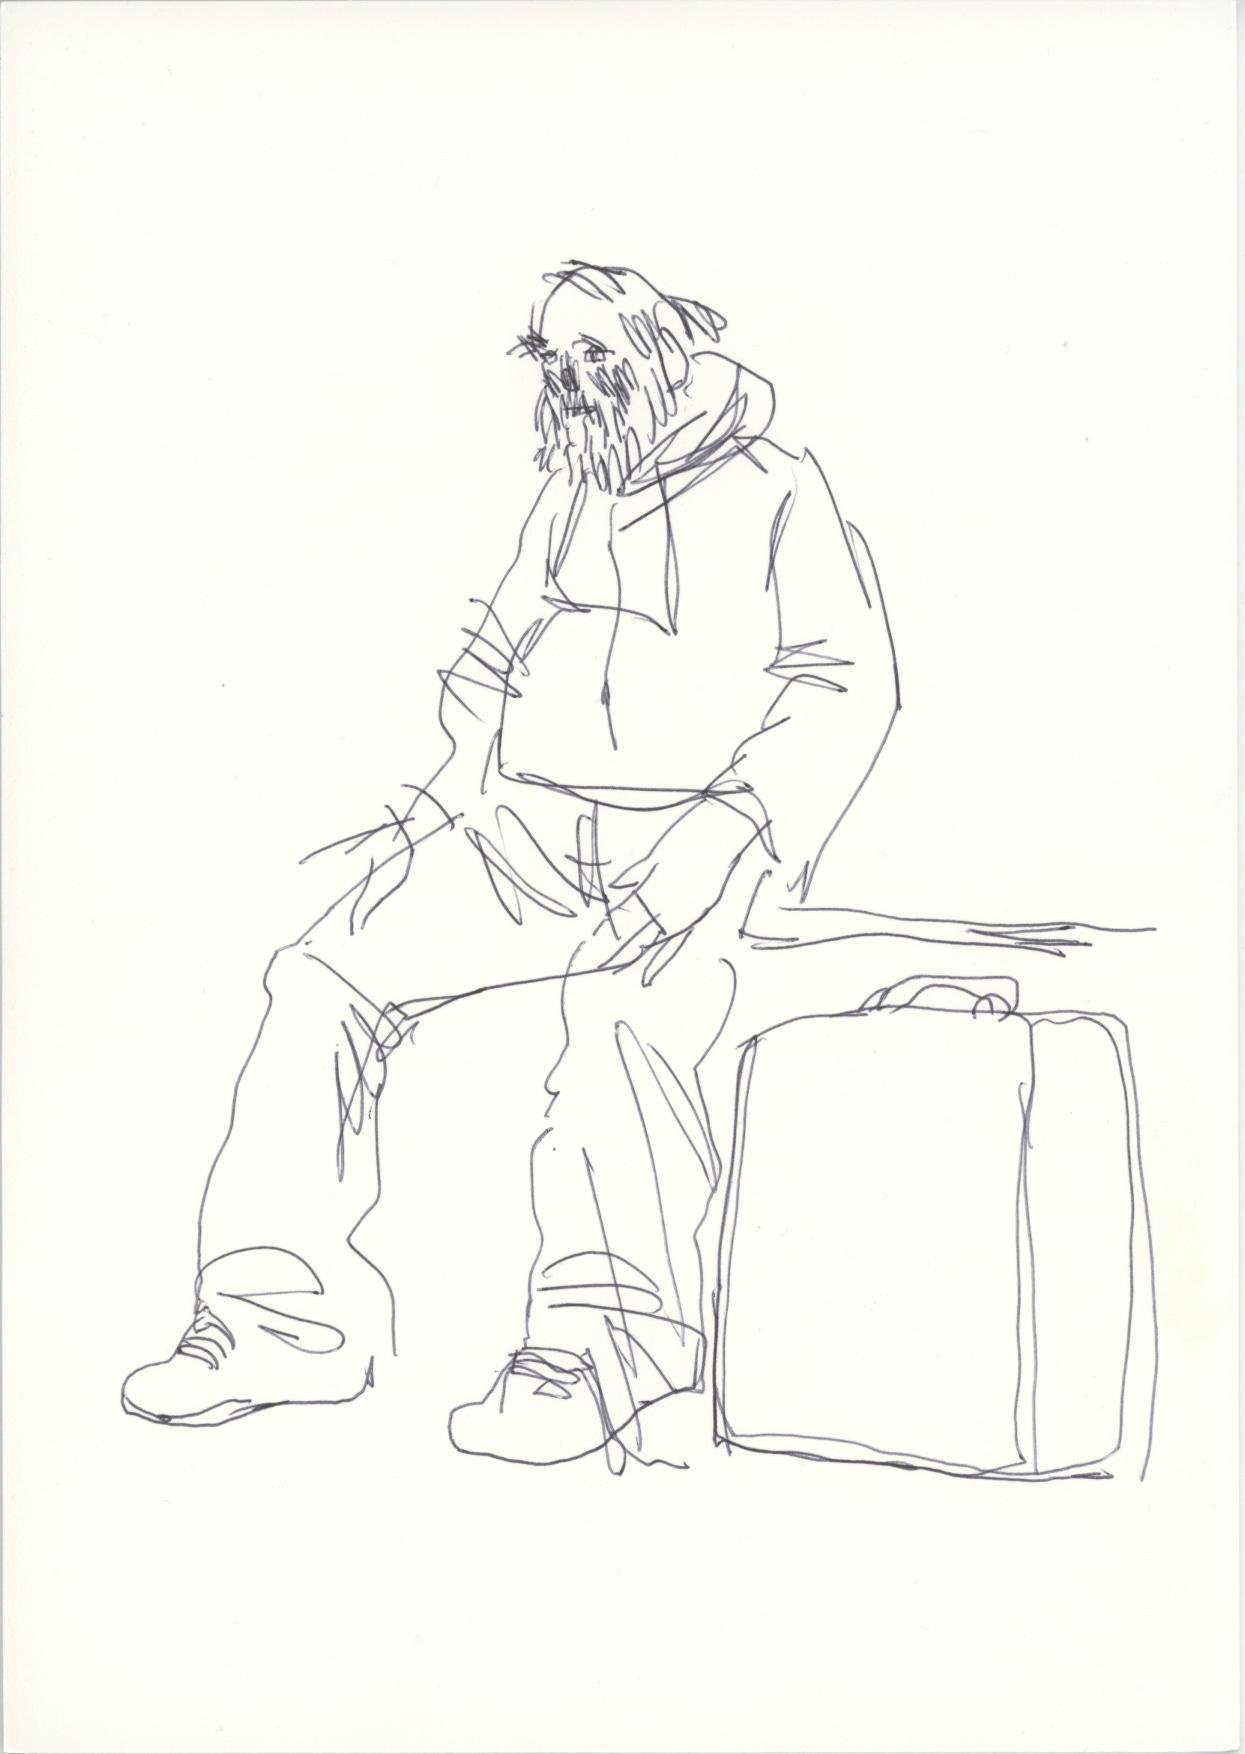 Sketch of a man with a suitcase on the street.